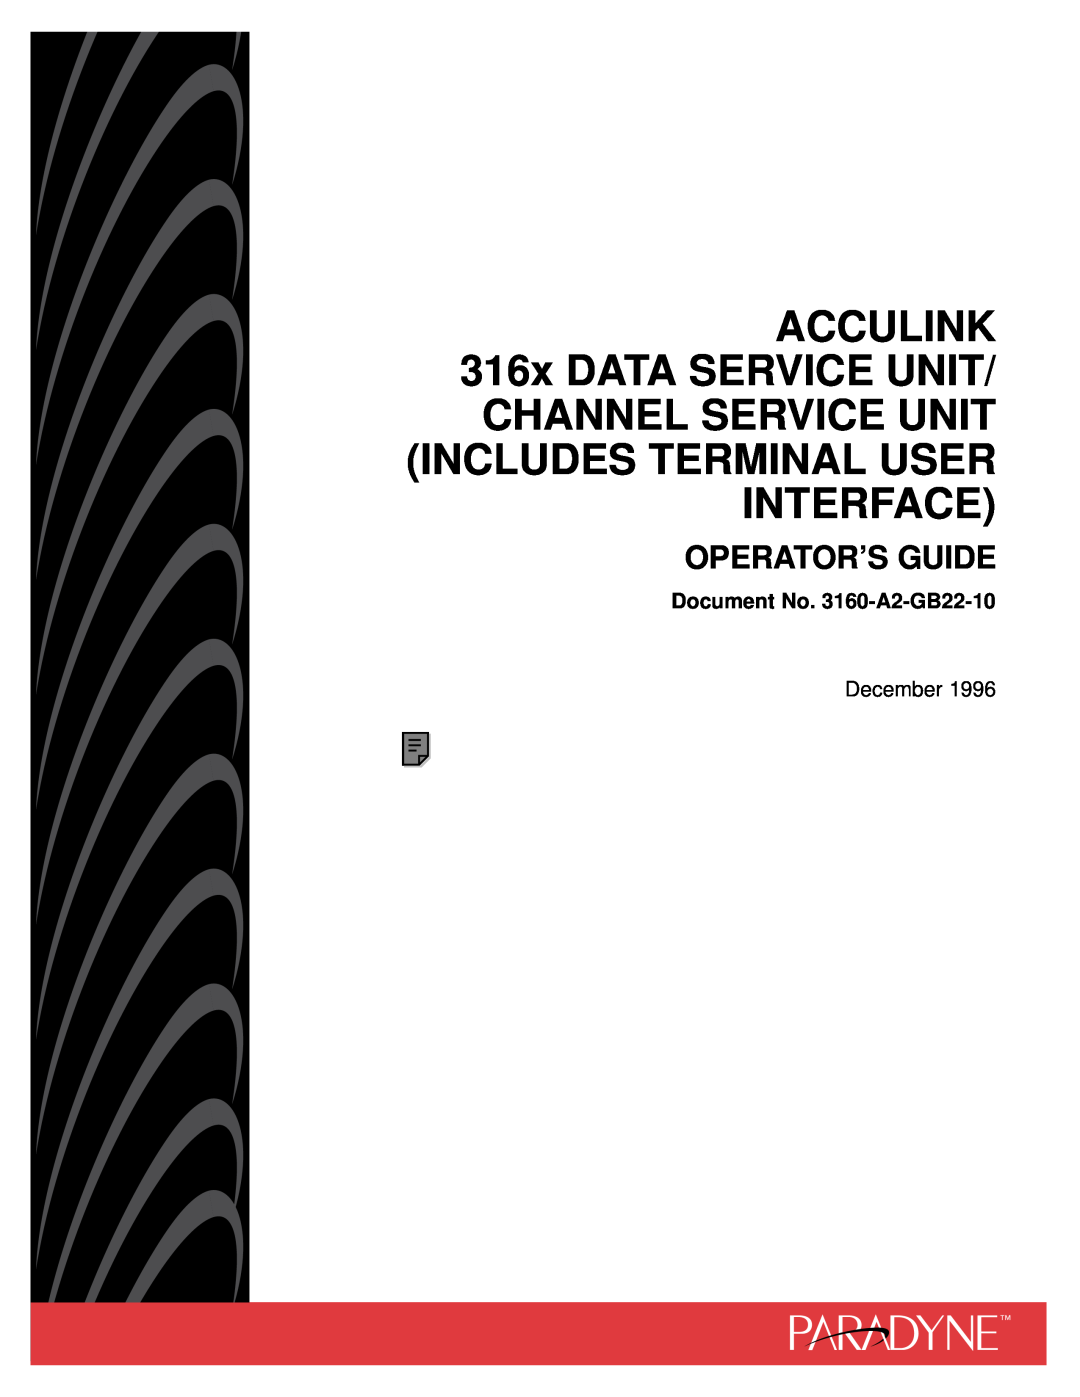 Paradyne manual Operators Guide, Document No. 3160-A2-GB22-10, ACCULINK 316x DATA SERVICE UNIT, December 